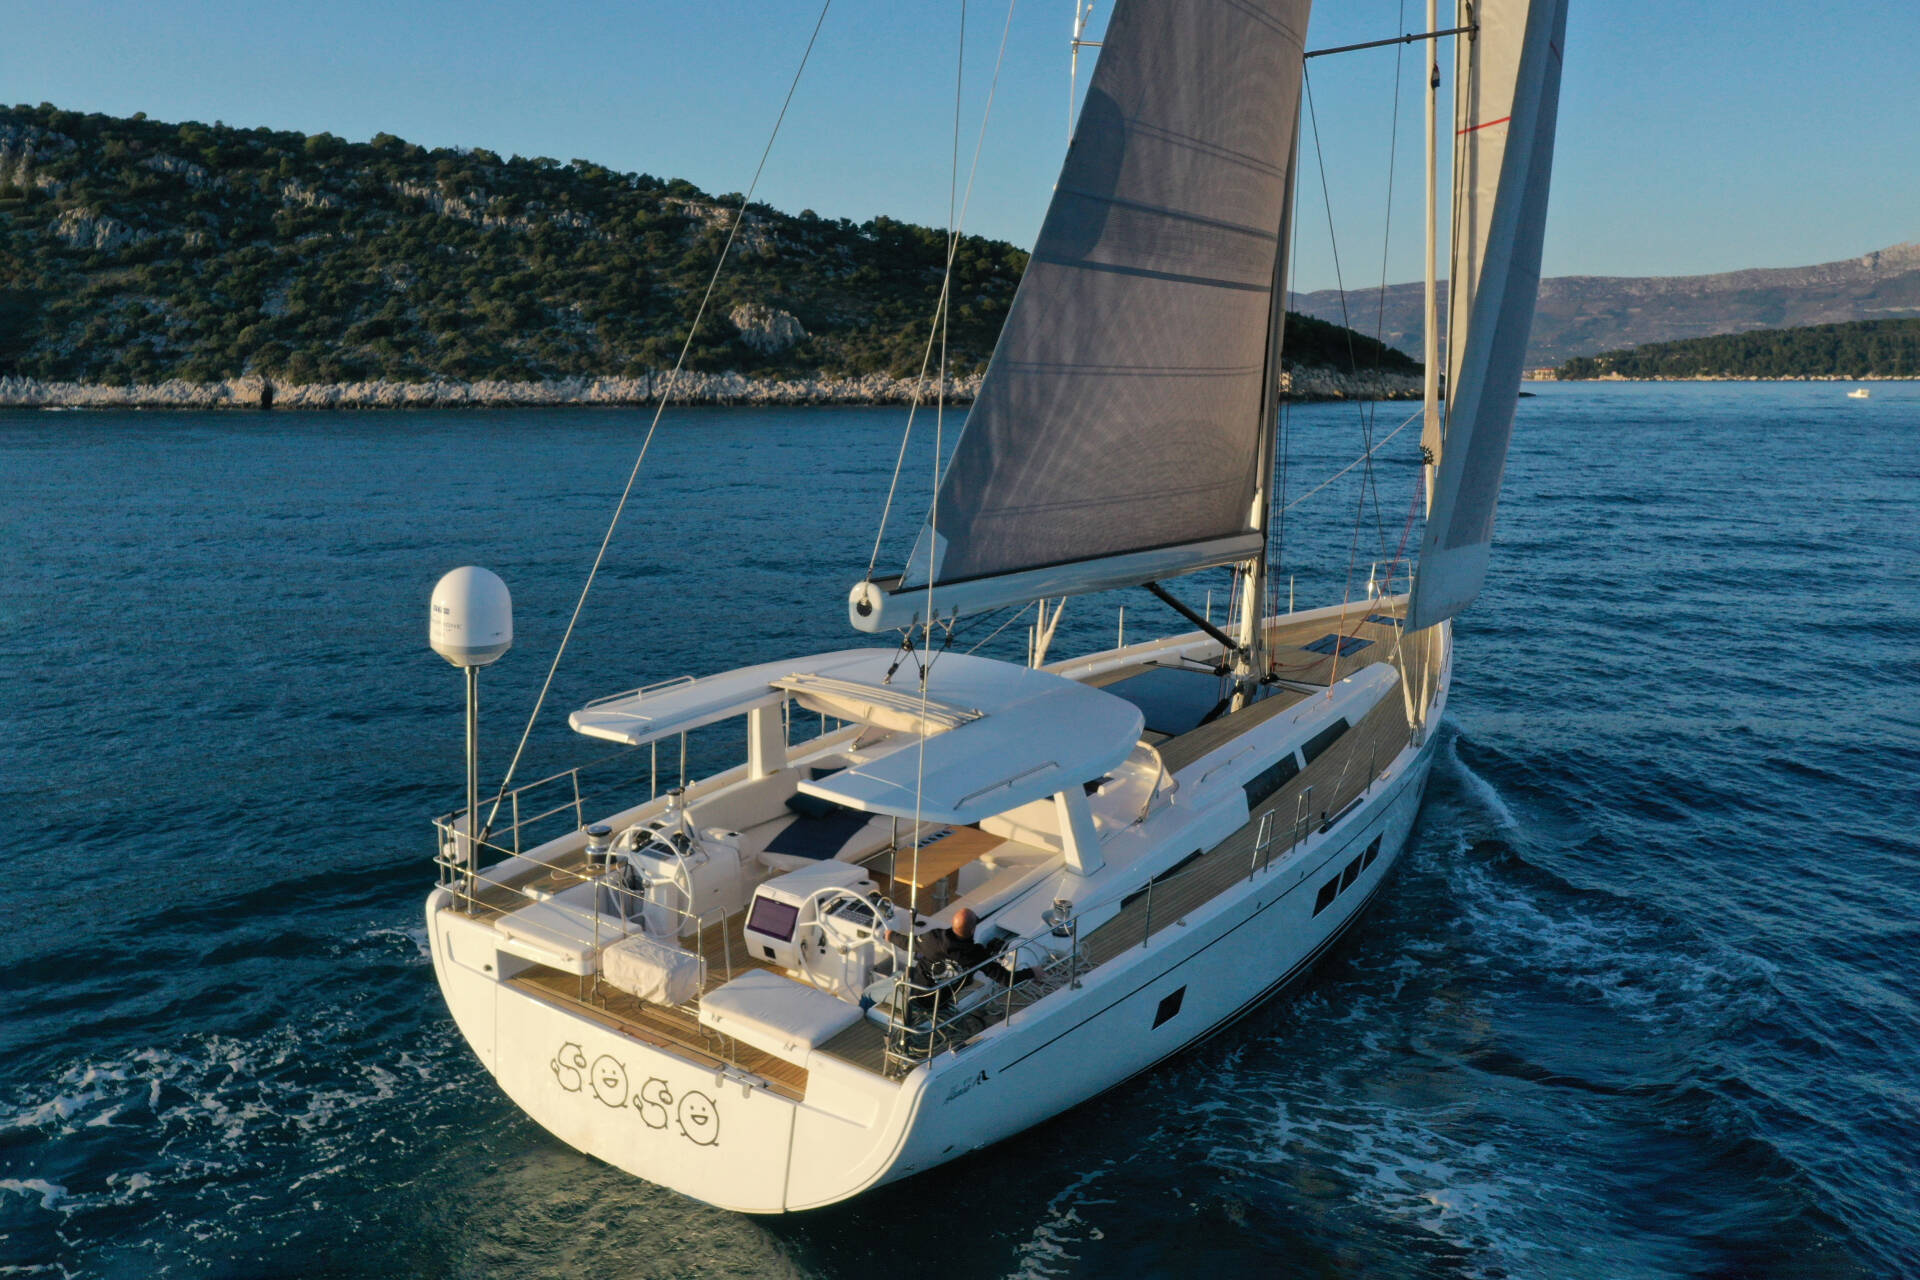 Need help with yacht charter?